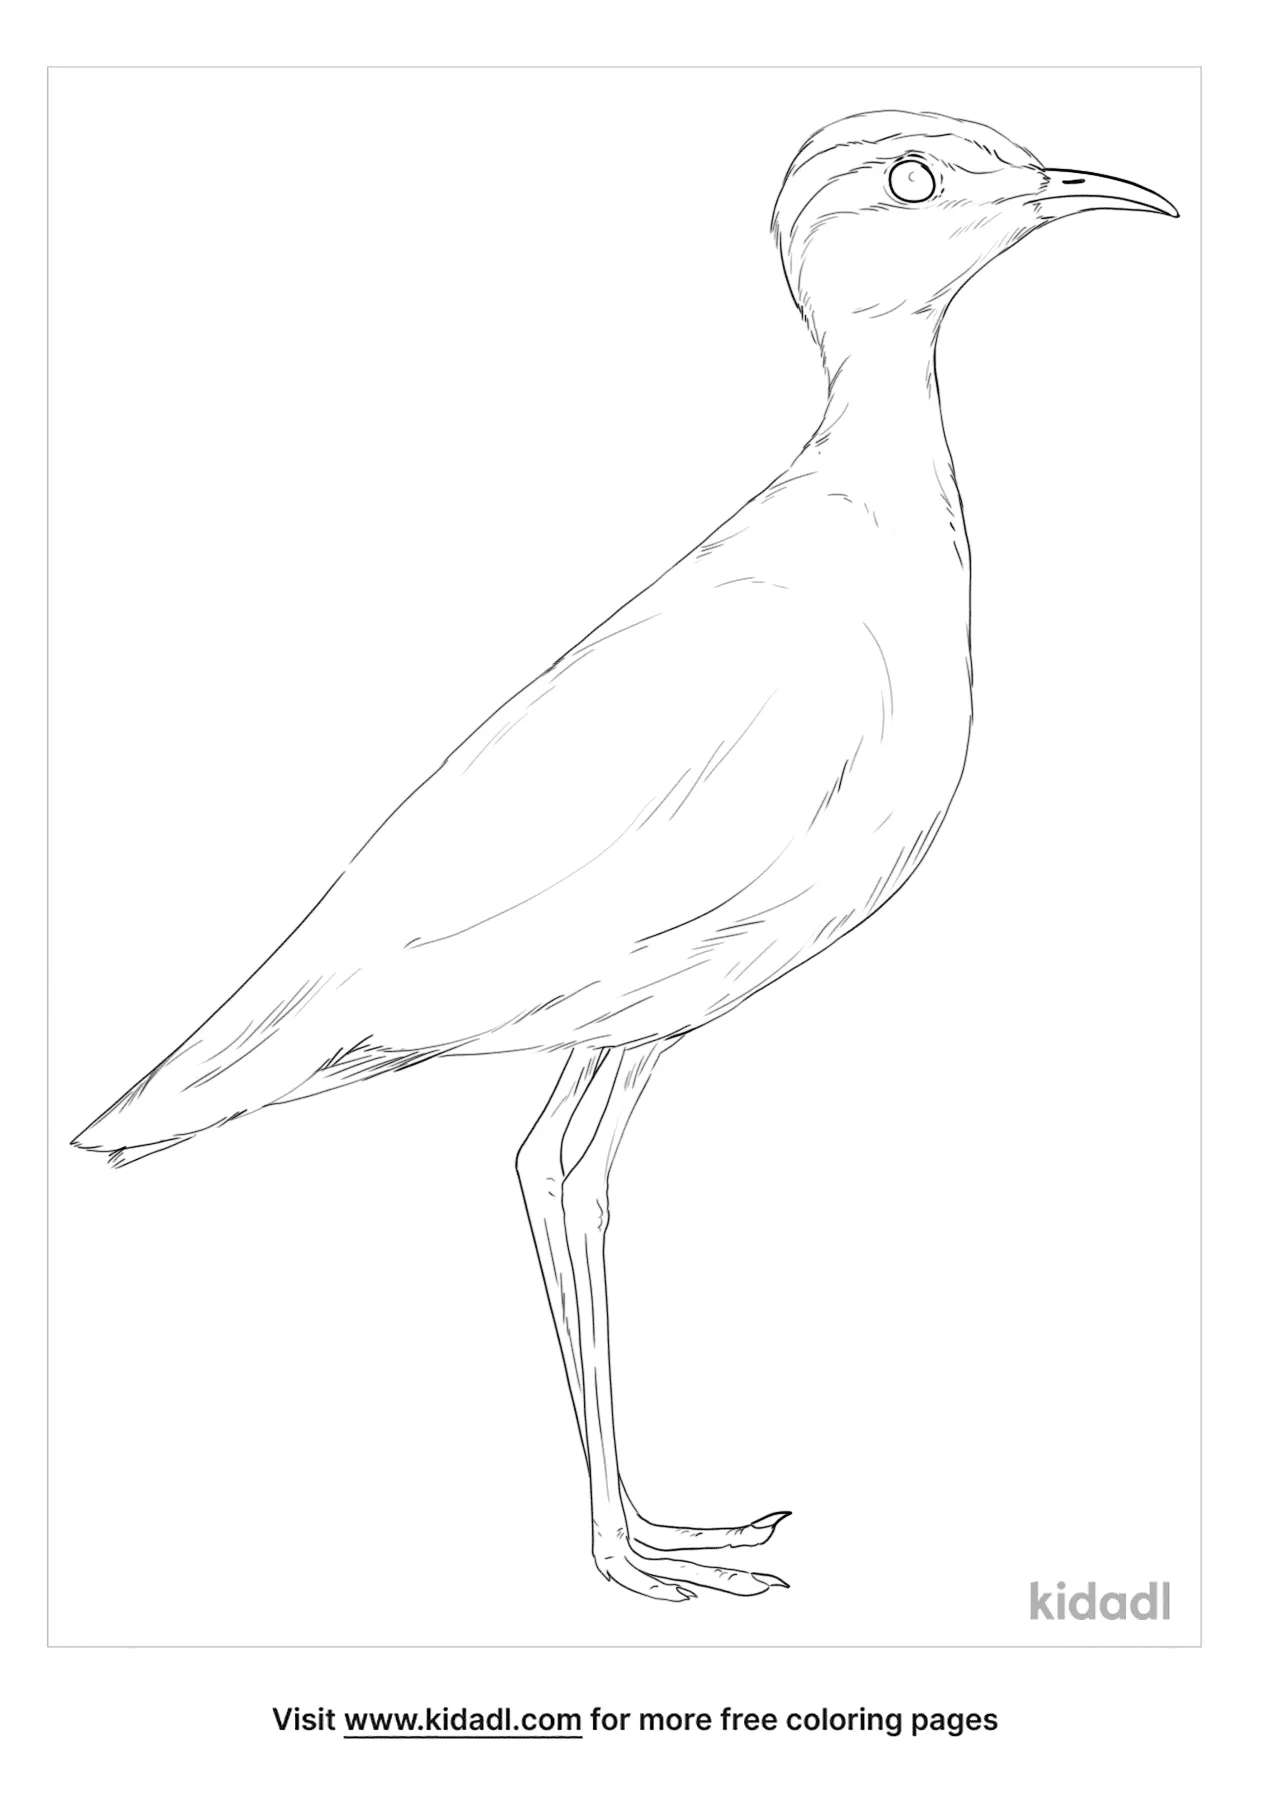 Indian Courser Coloring Page